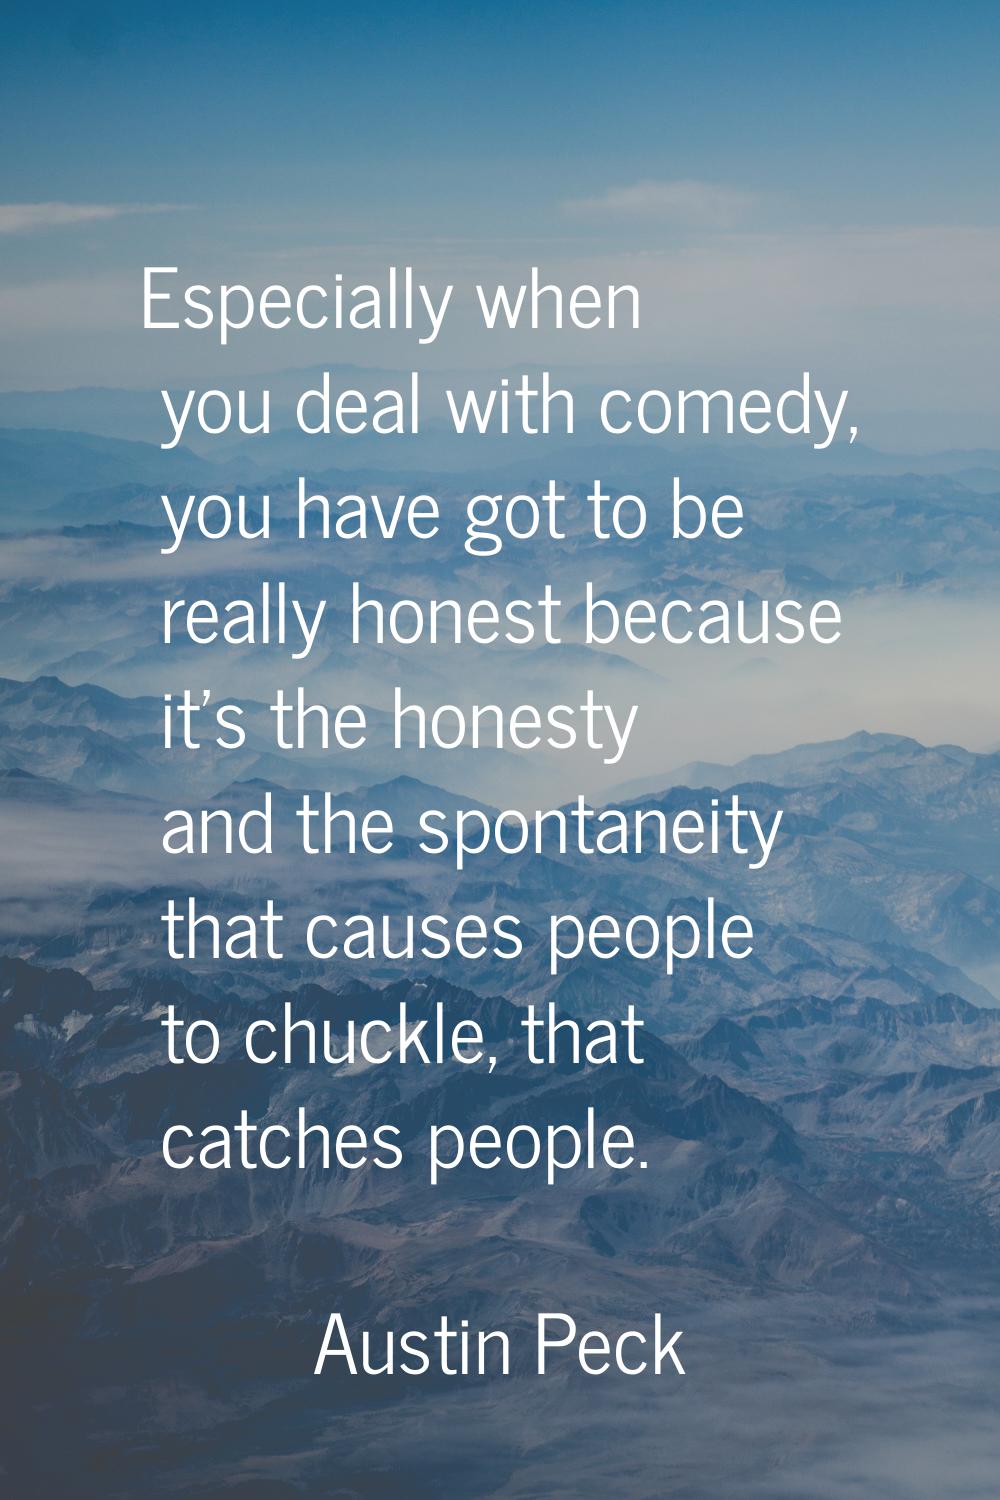 Especially when you deal with comedy, you have got to be really honest because it's the honesty and